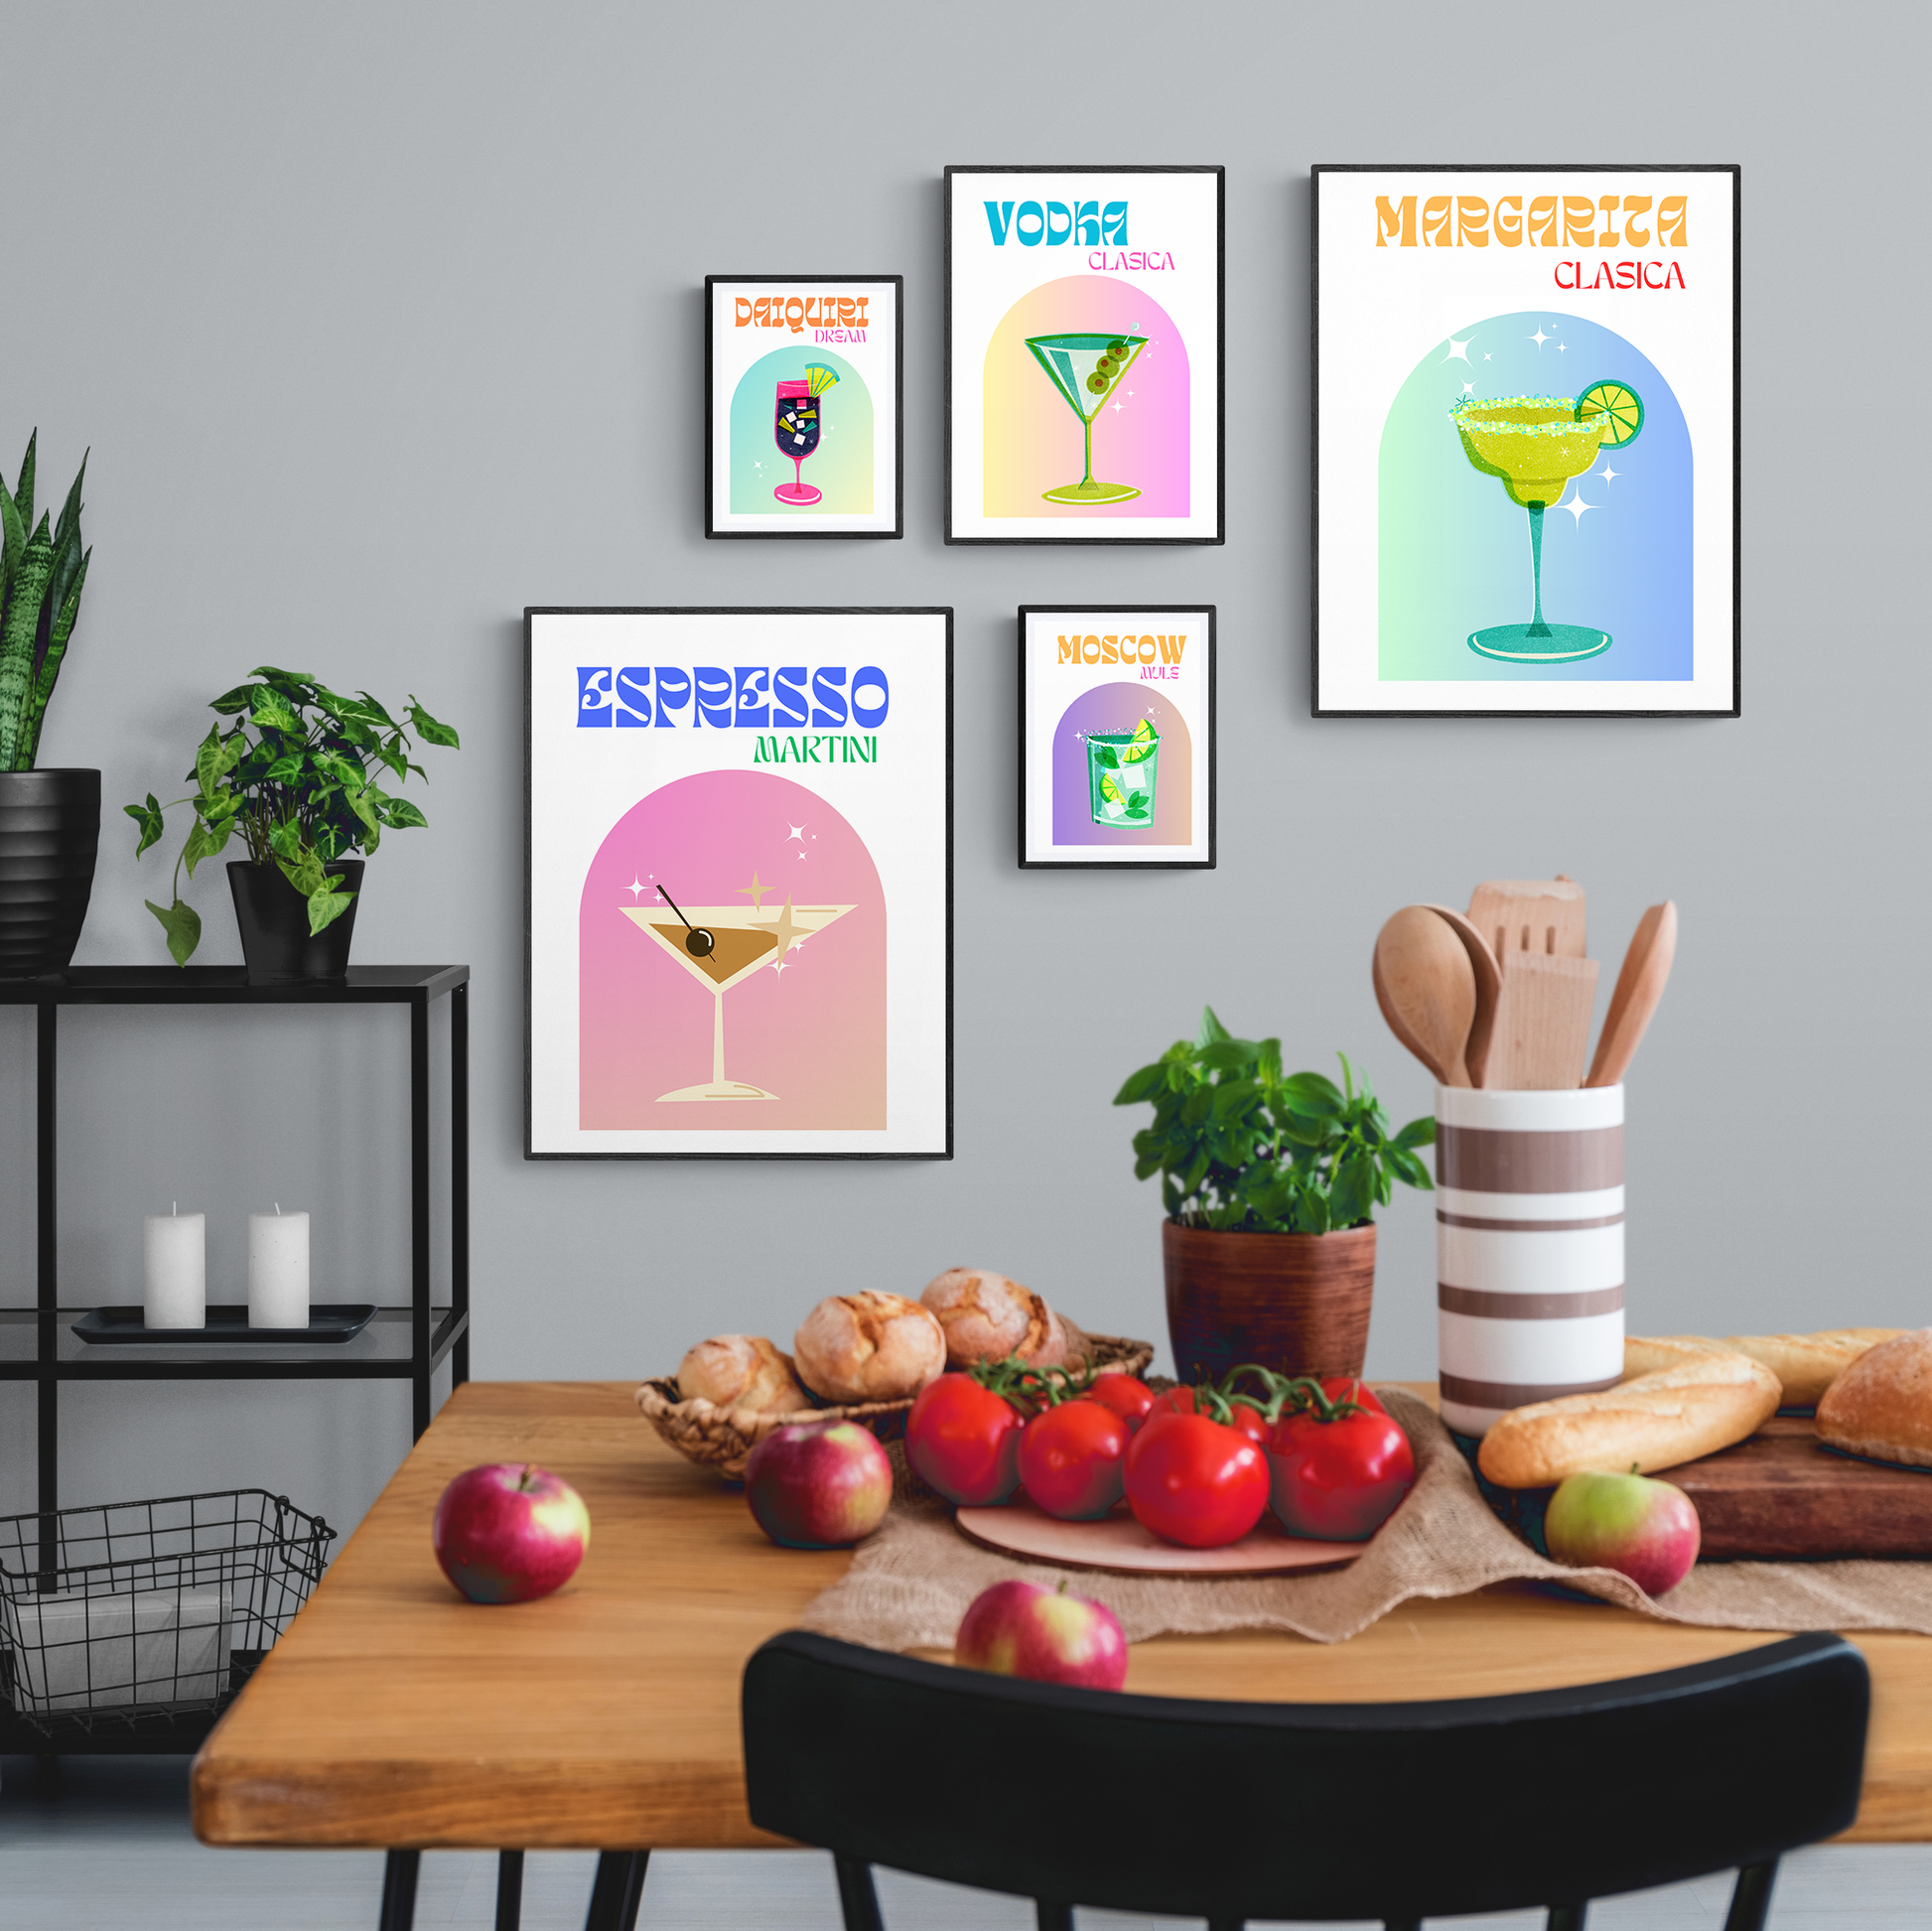 Brighten your kitchen, living room, or bar cart with this quintessential summer cocktail print! This colorful poster is printed with a classic Pina Colada recipe and decorated with retro-inspired illustrations – perfect for discovering your favorite recipes or inspiring artful dreams. A unique gift for any cocktail enthusiast!